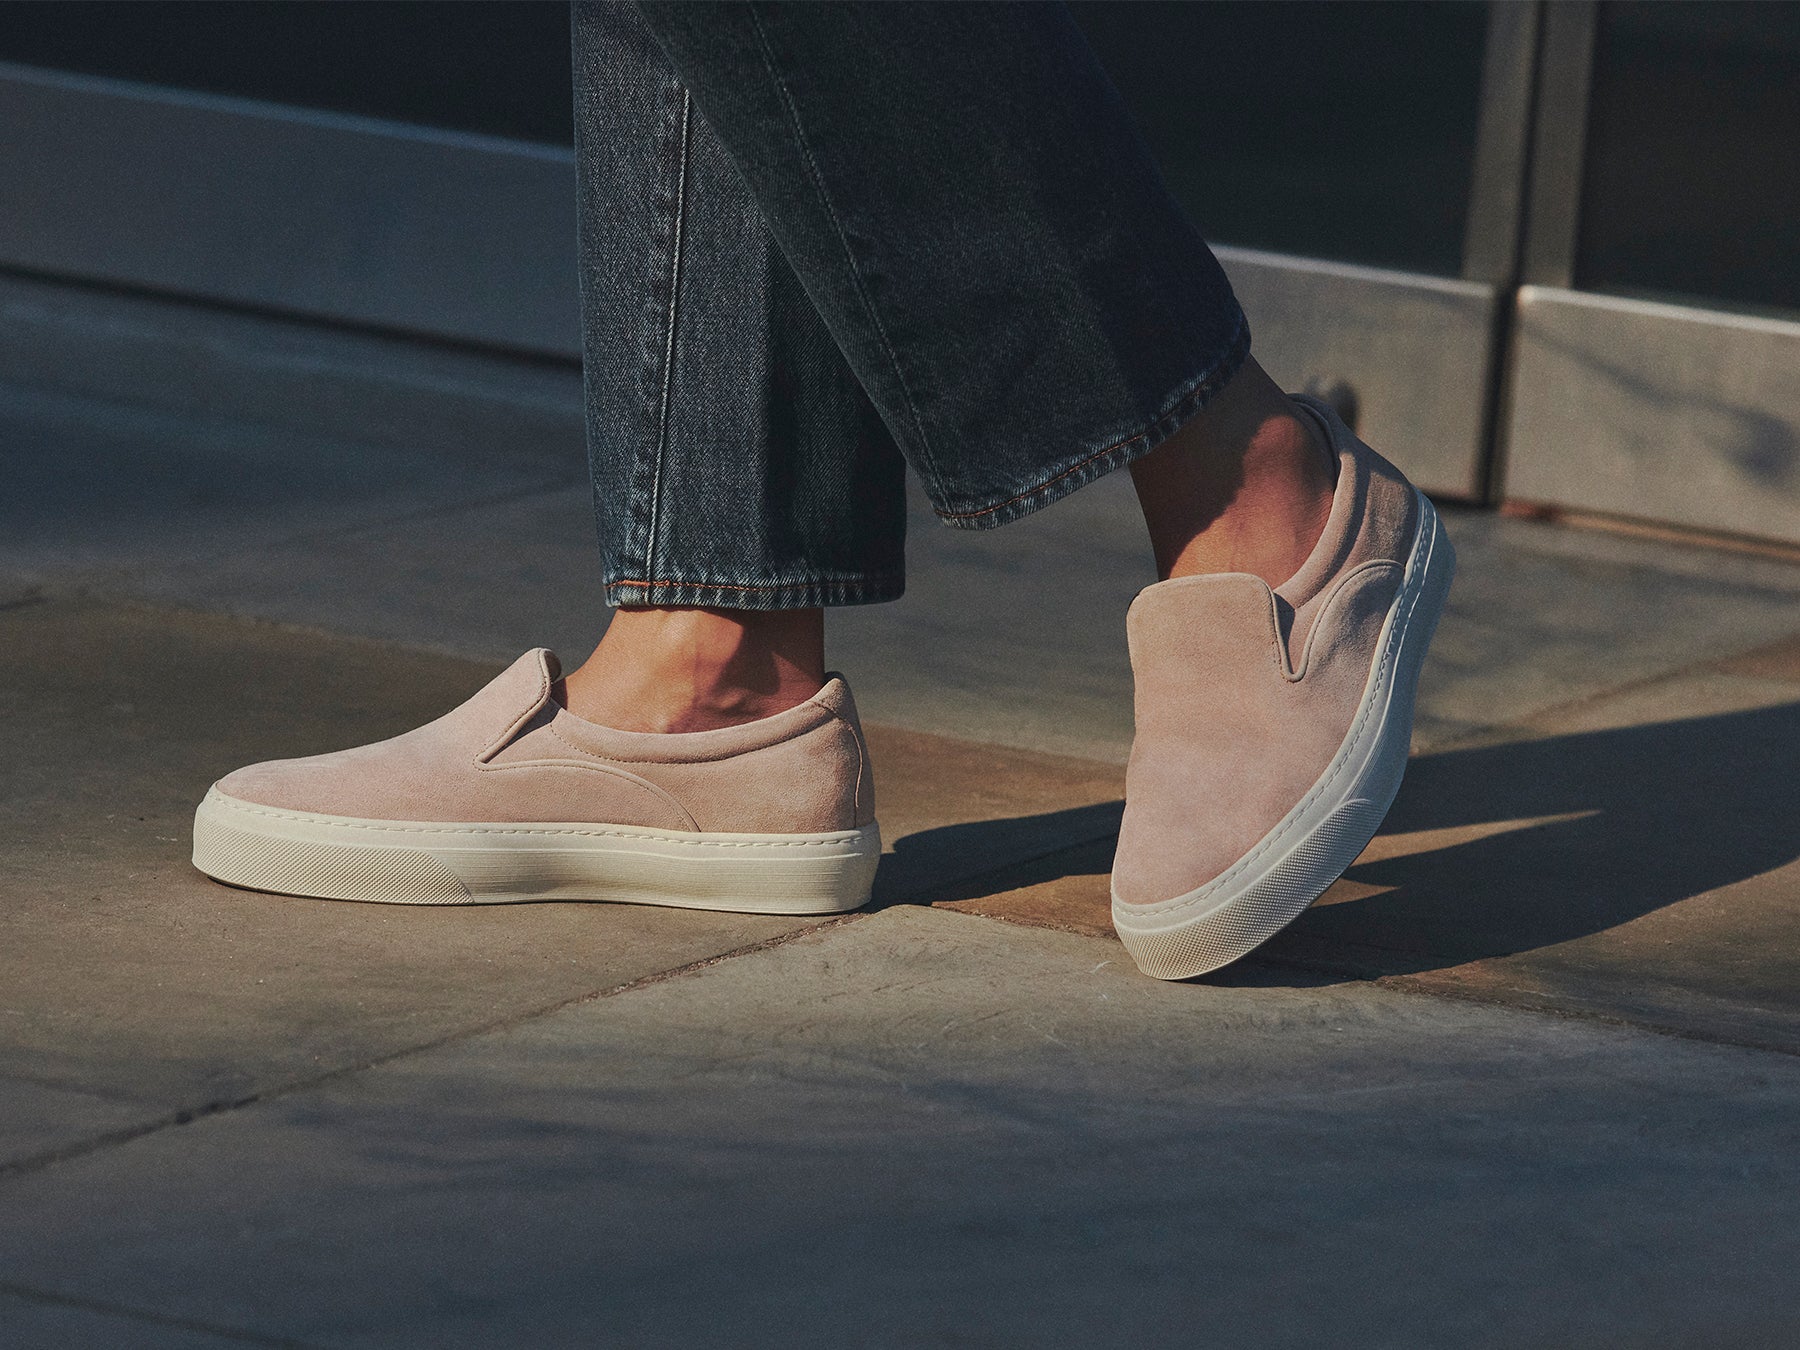 Slip-on Trainers, the BEAT